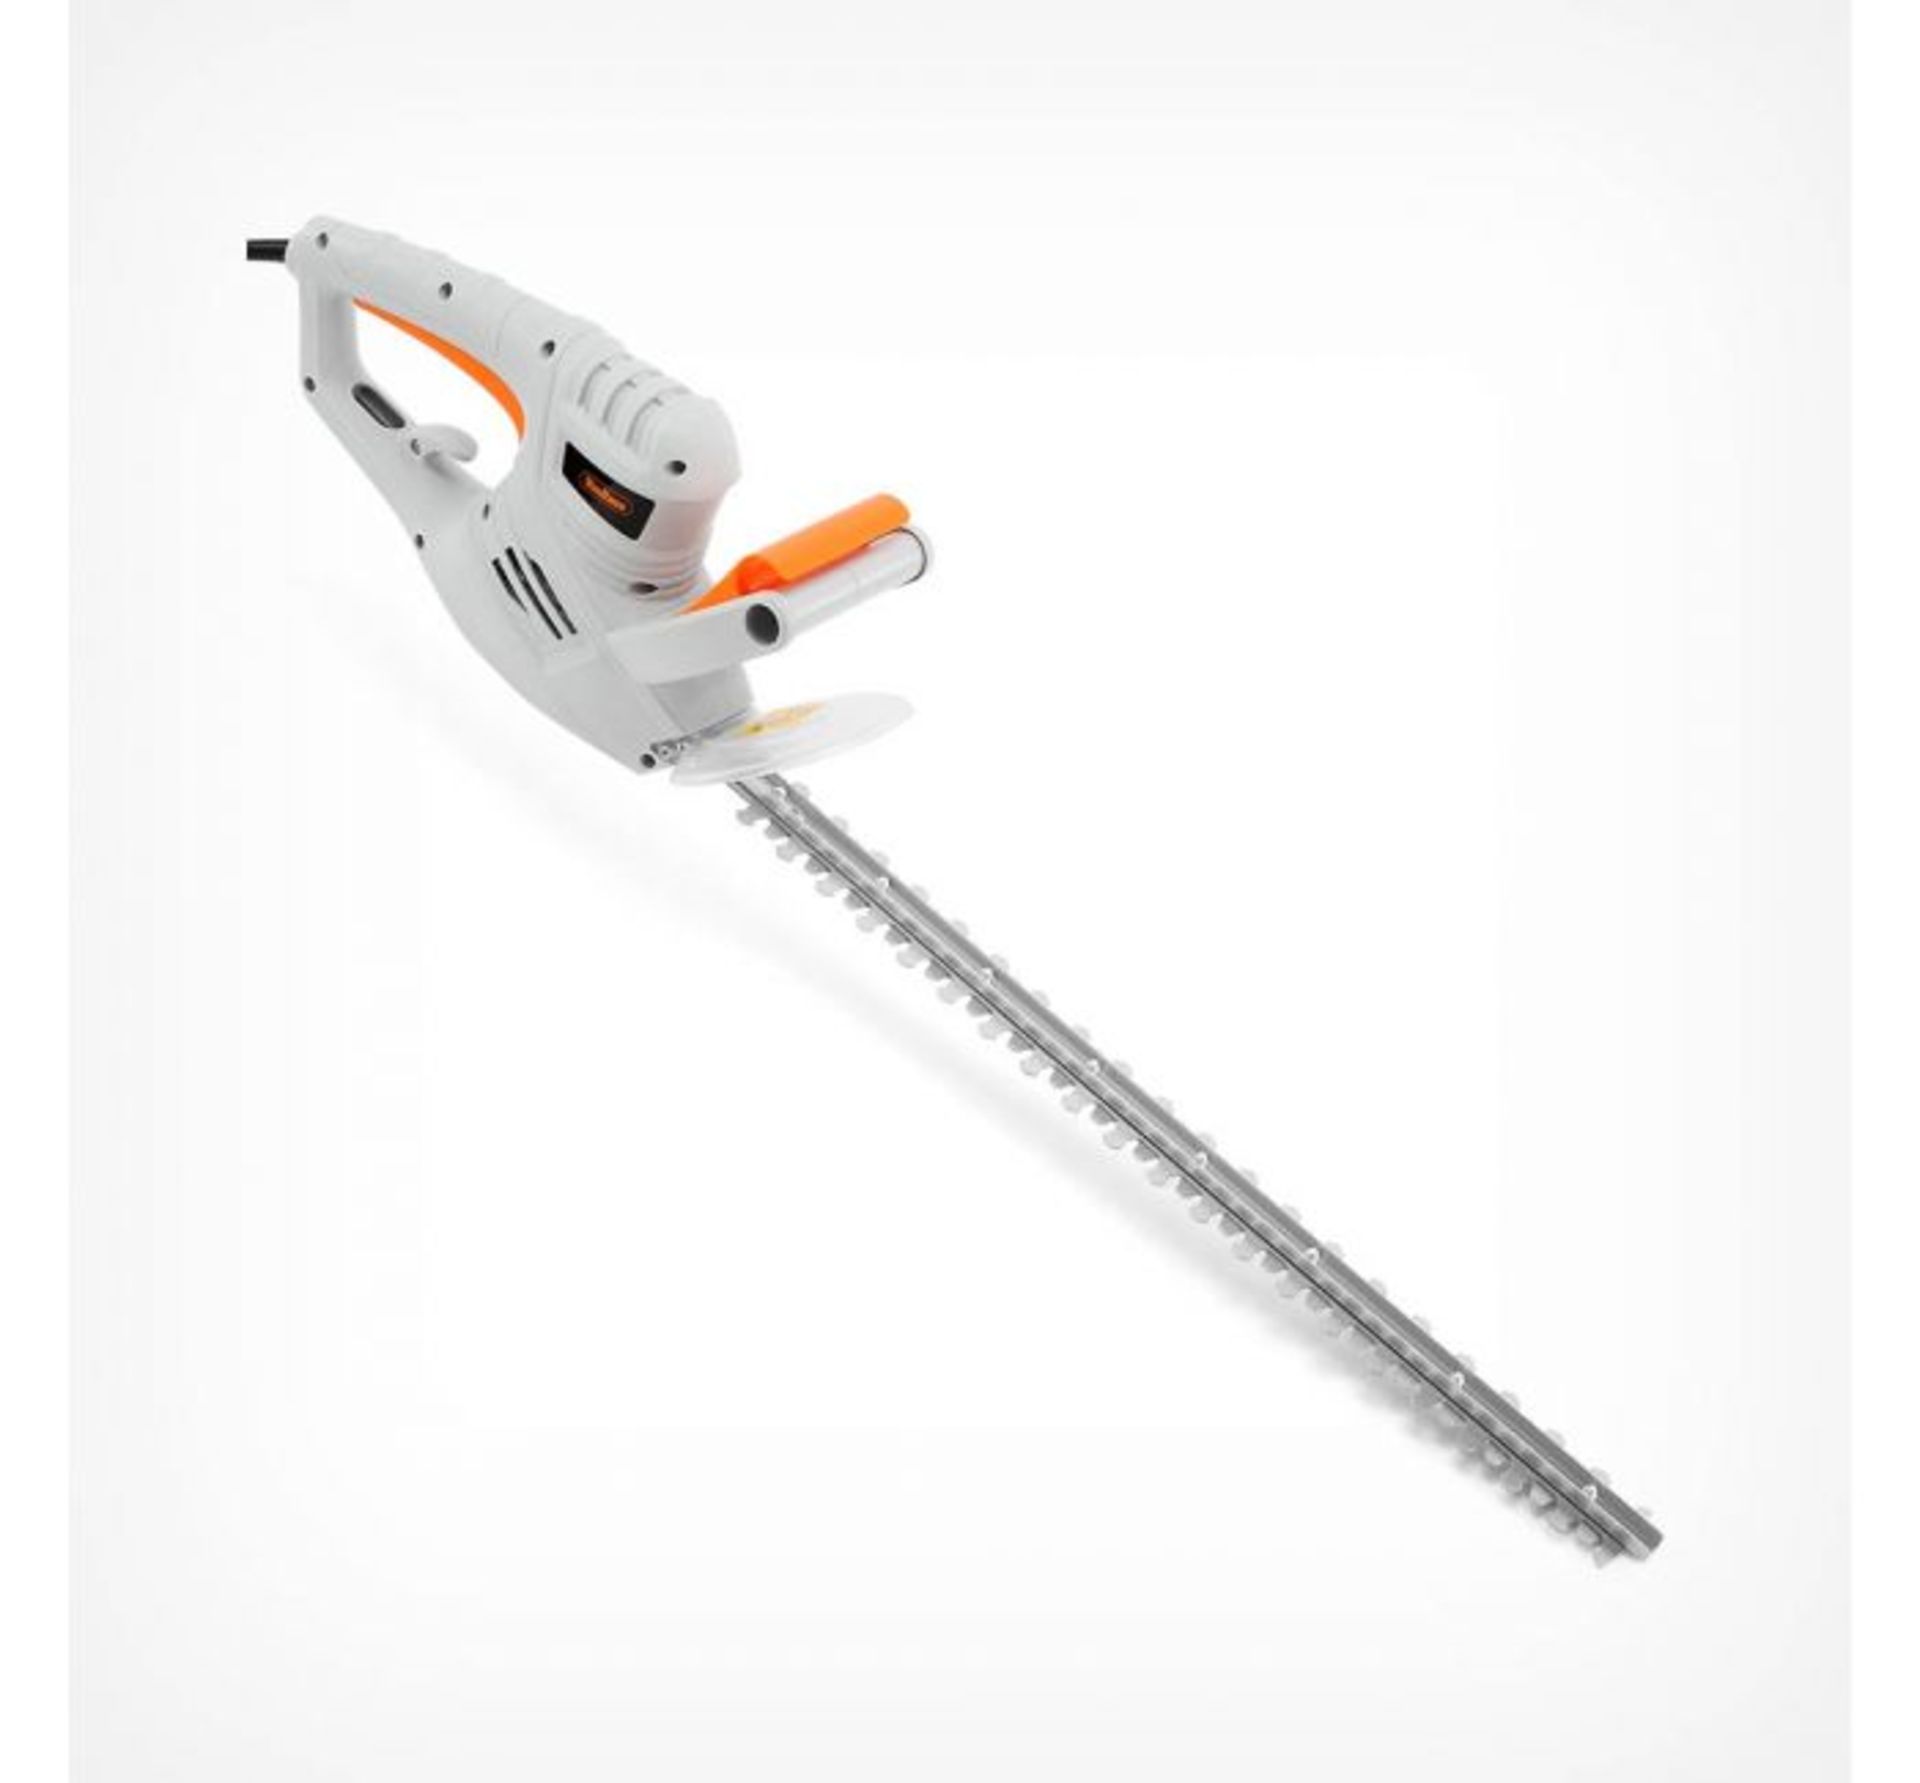 (F57) 550W Hedge Trimmer Lightweight at only 3.2kg with a powerful 550W motor and precision bl... - Image 2 of 3